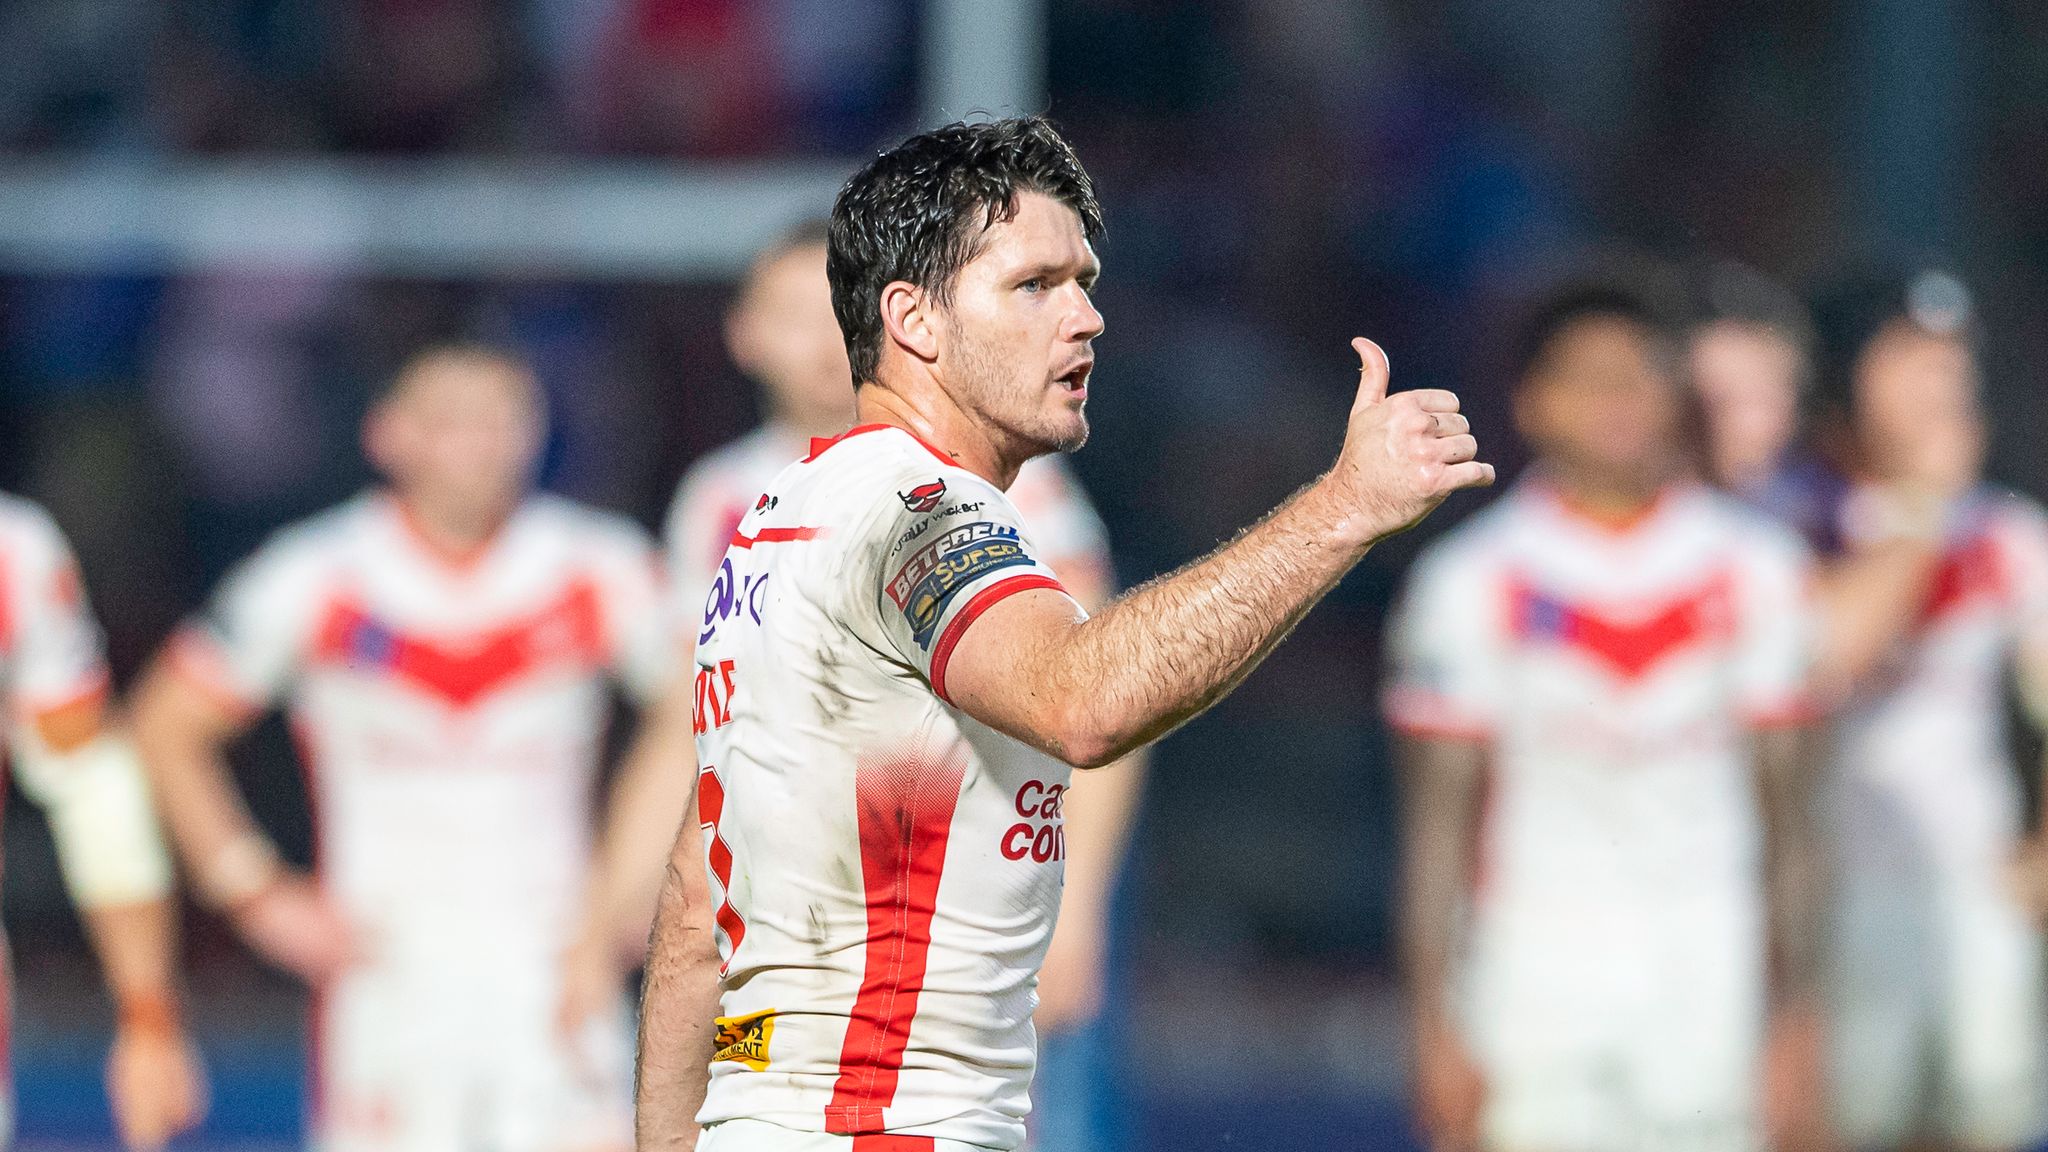 Lachlan Coote St Helens full-back aims to finish on high ahead of Wigan Warriors derby clash Rugby League News Sky Sports